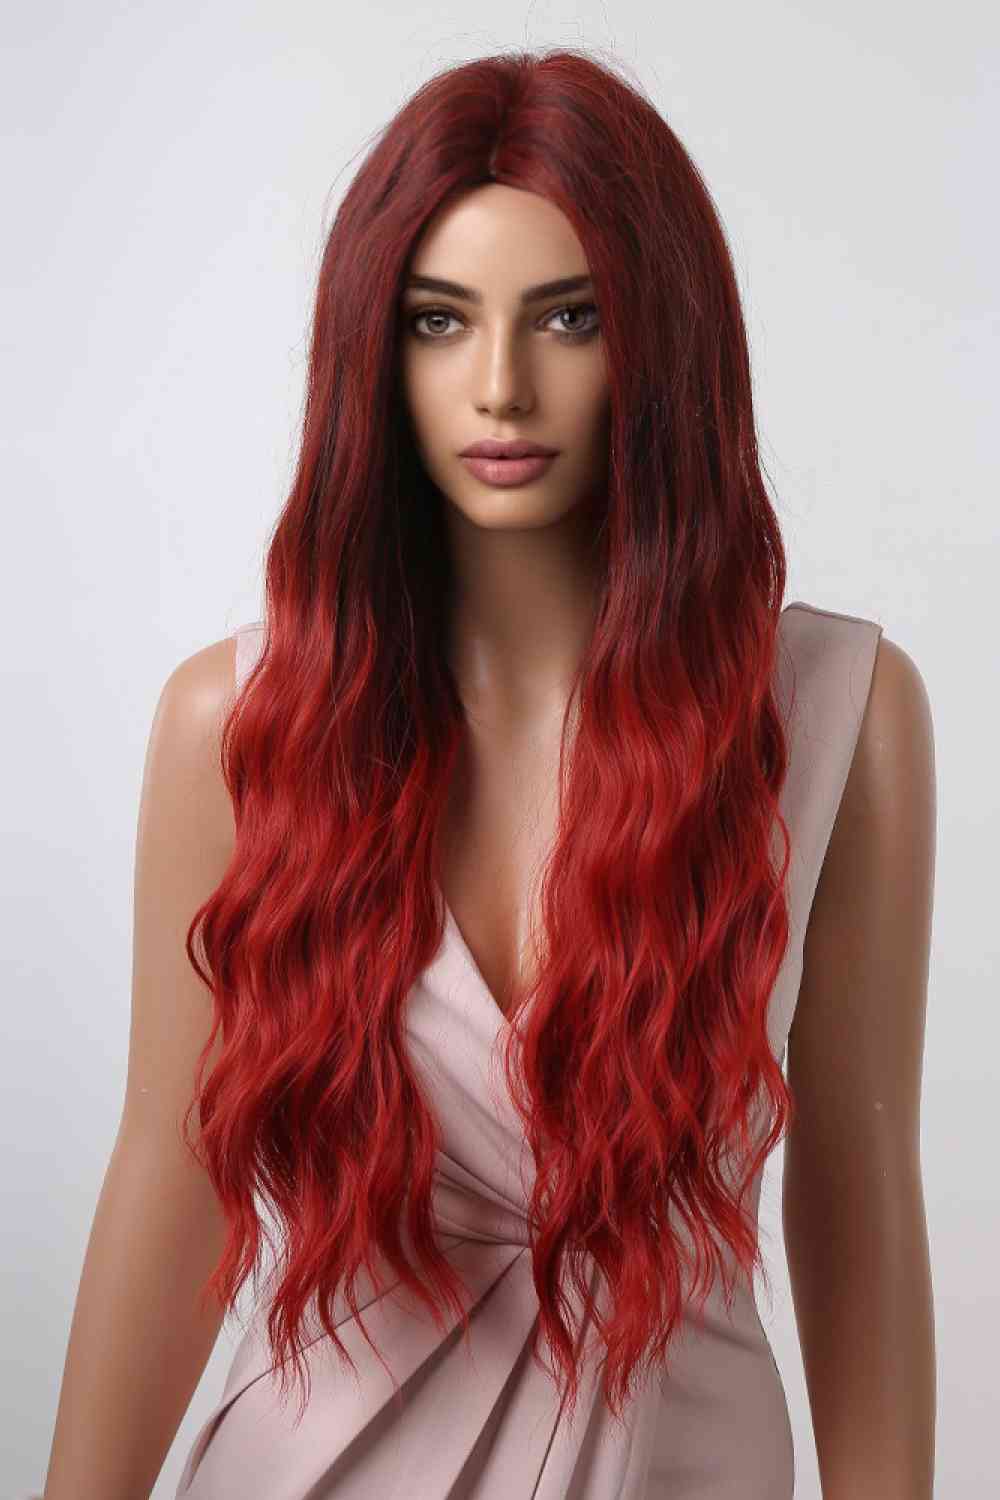 13*1" Full-Machine Wigs Synthetic Long Wave 27" - TRENDMELO